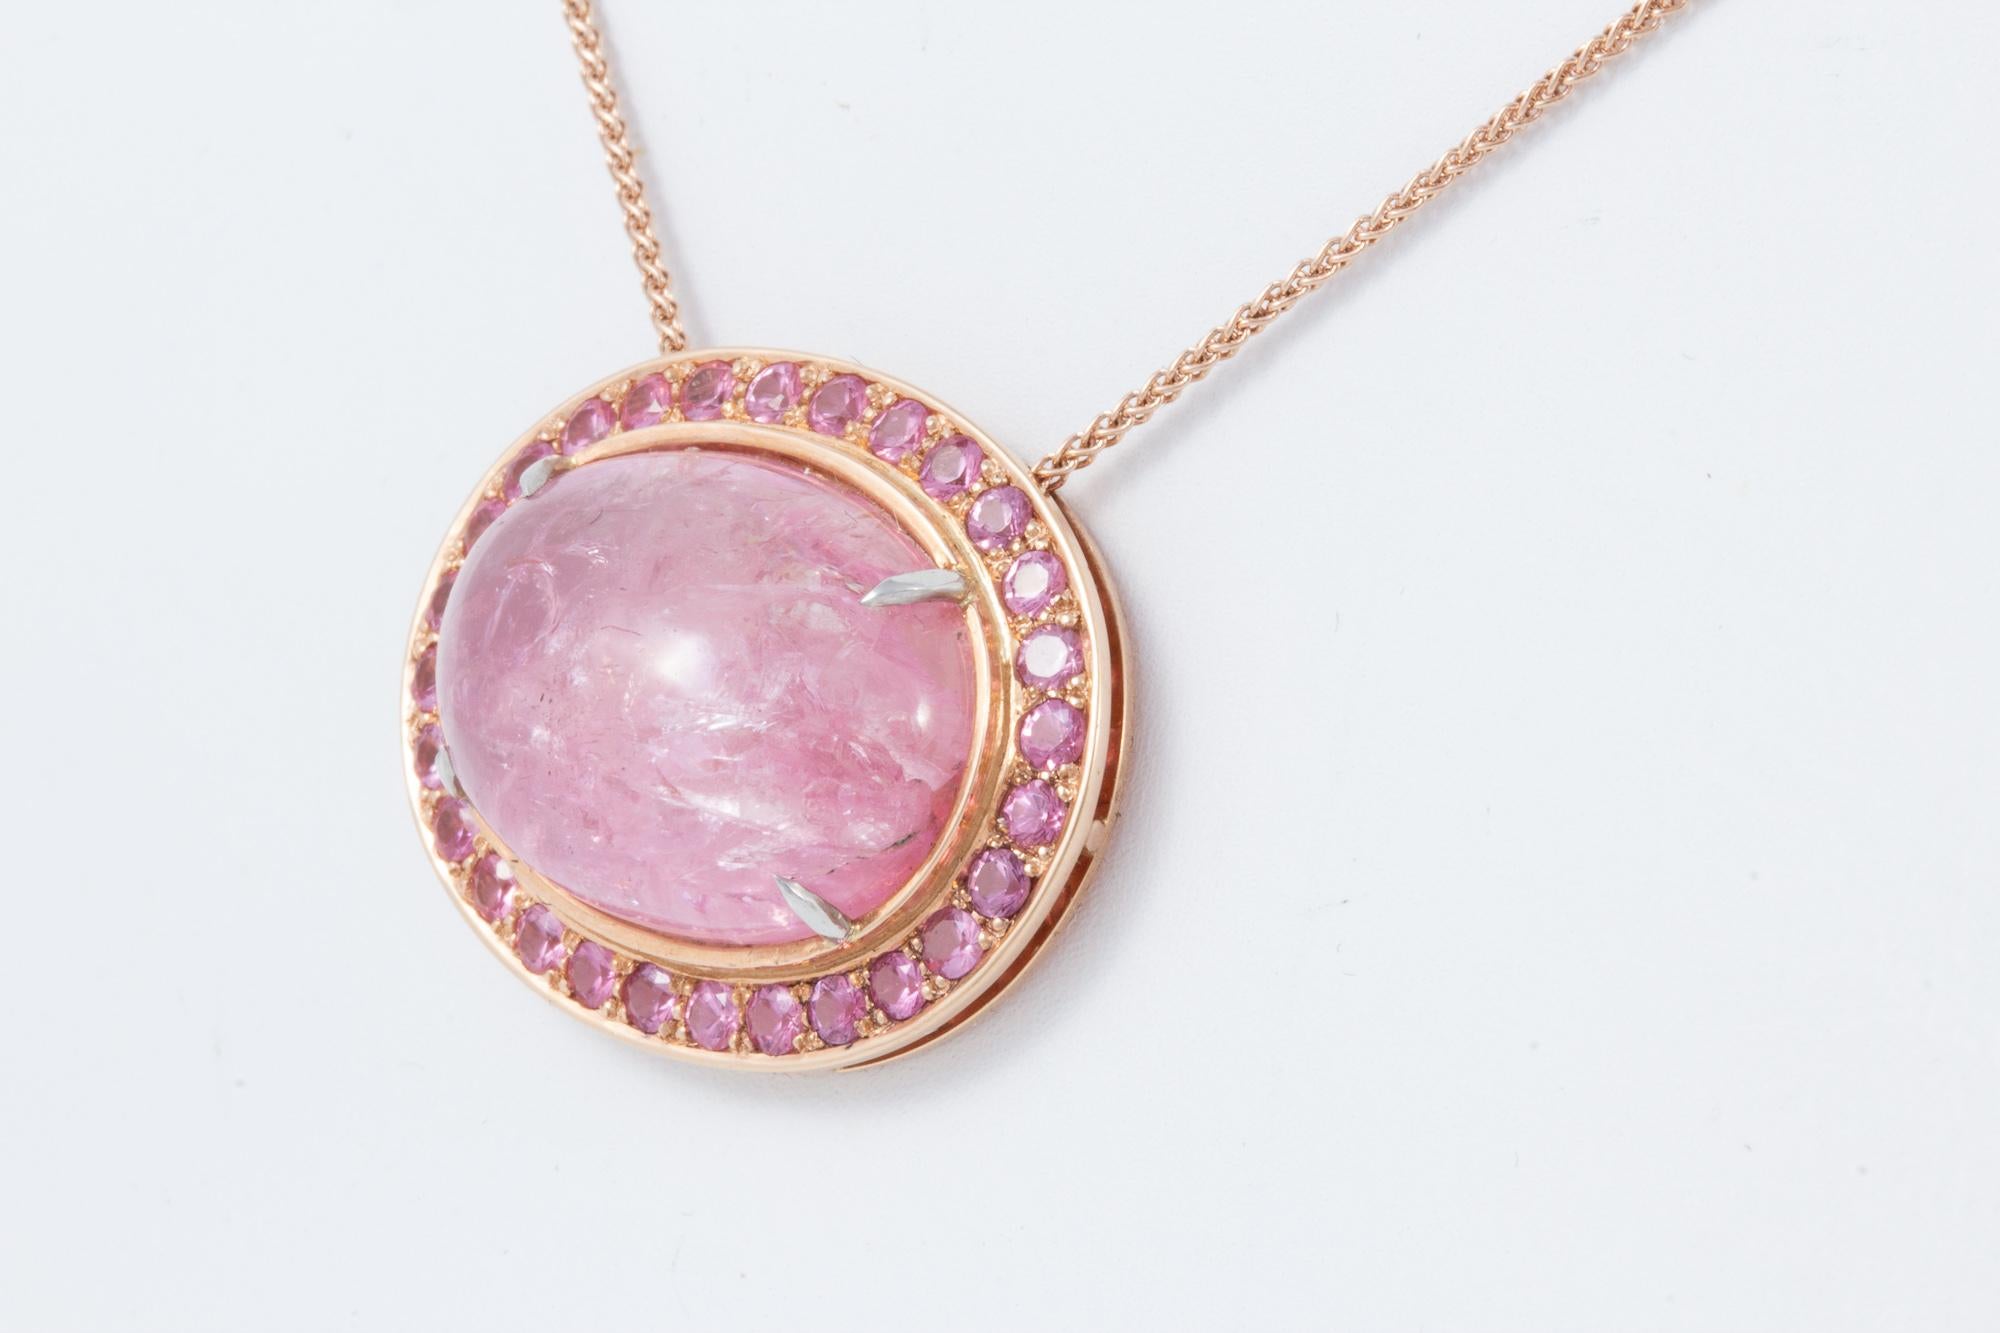 Rare Pink Fancy Tanzanite Cabochon Necklace in 18 kt Rose Gold For Sale 5